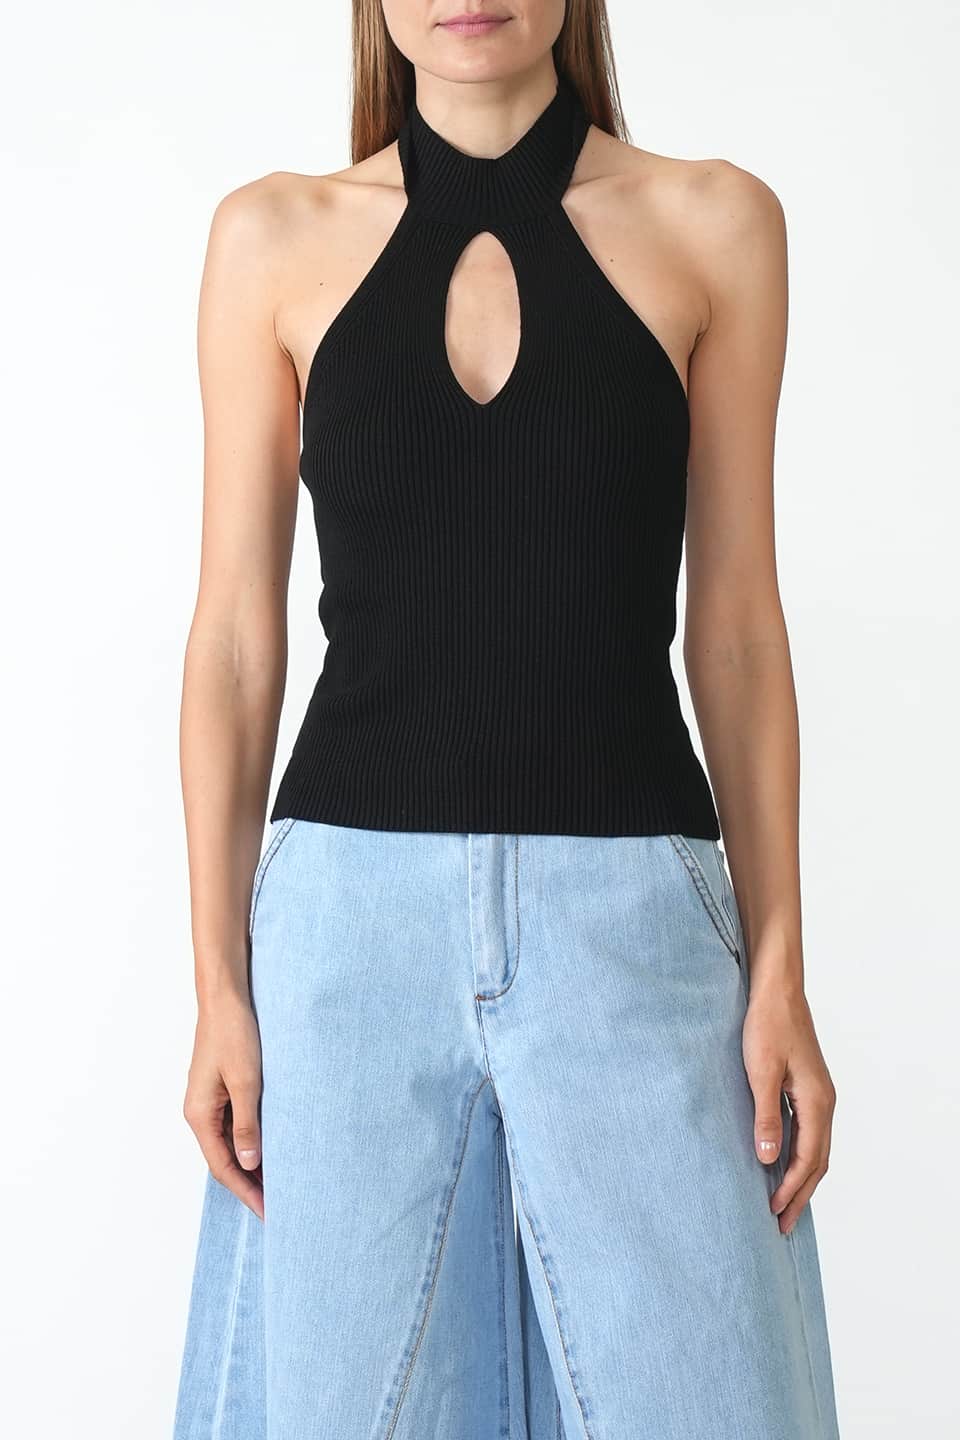 Thumbnail for Product gallery 1, Backless Stretch Top Black